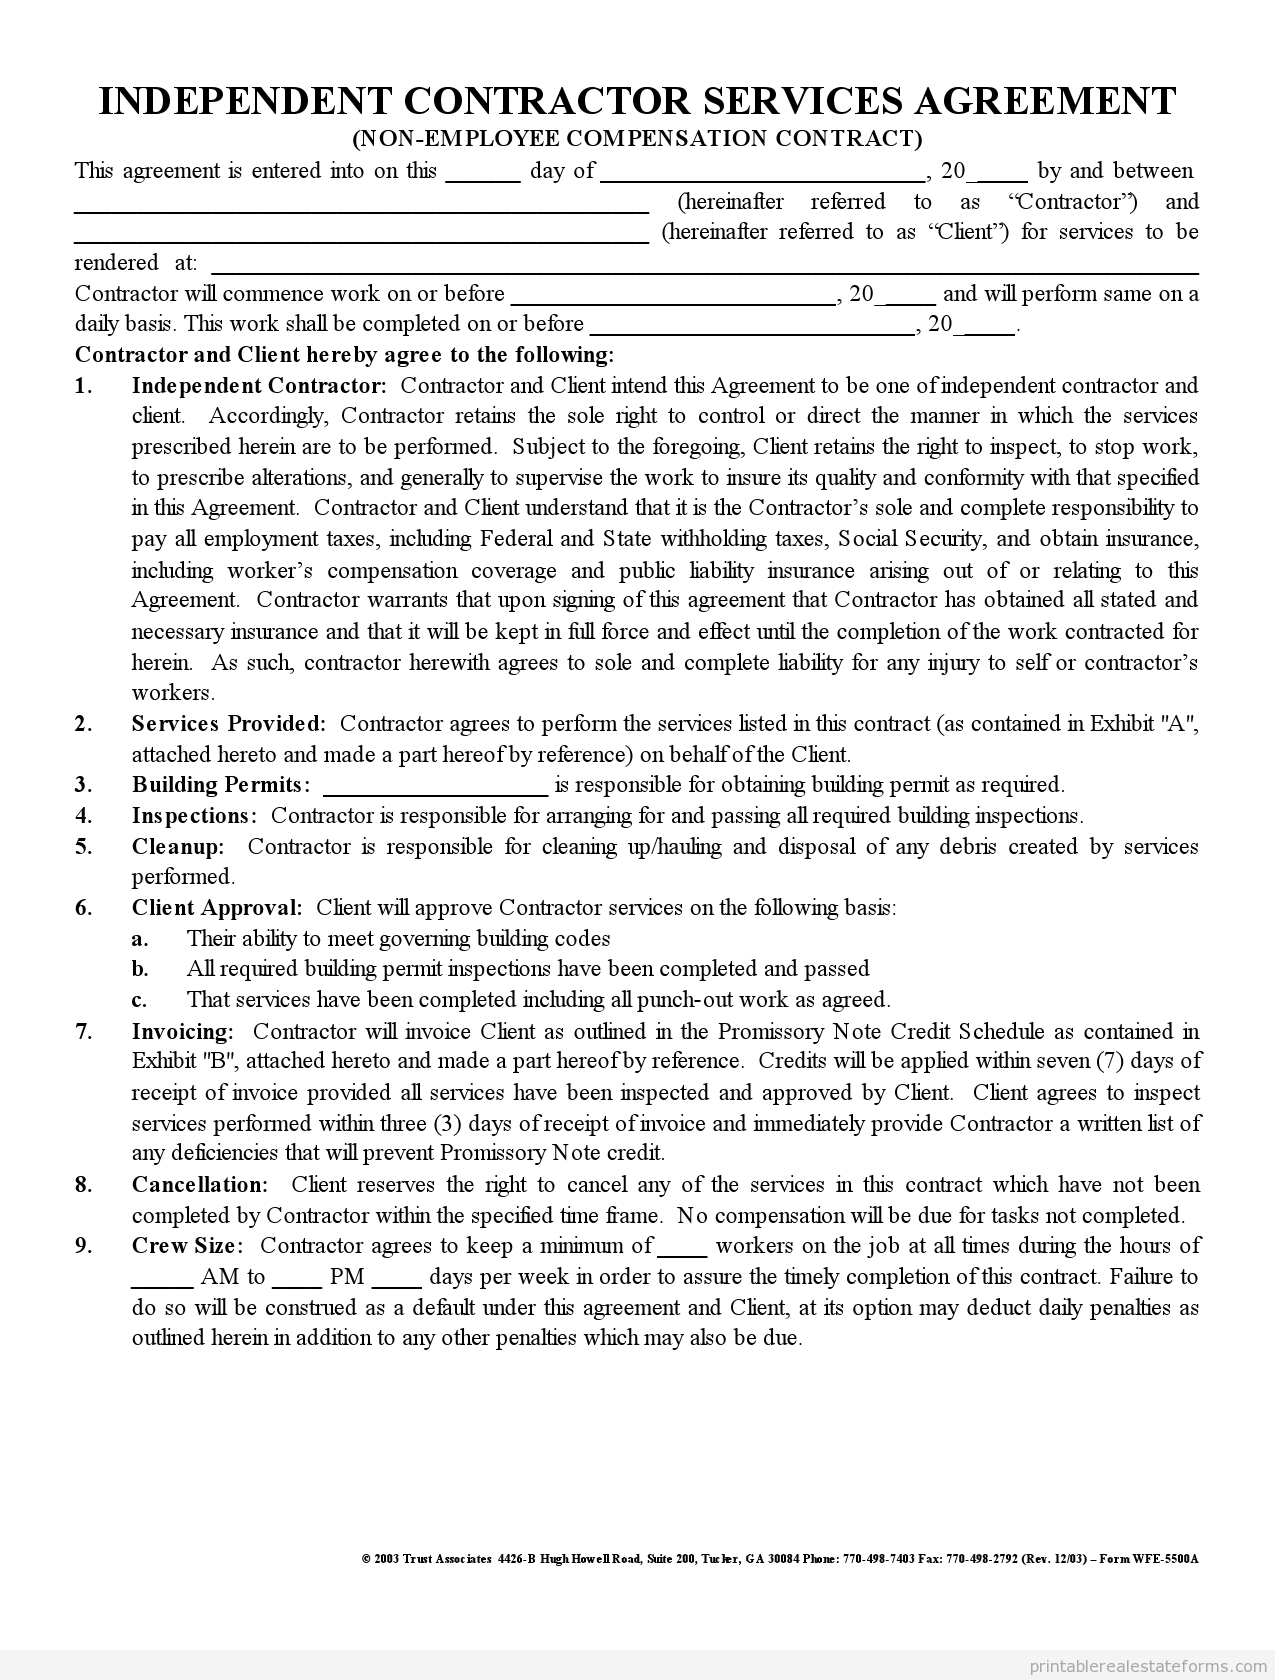 Free Printable Independent Contractor Agreement Form | Printable - Free Printable Contracts